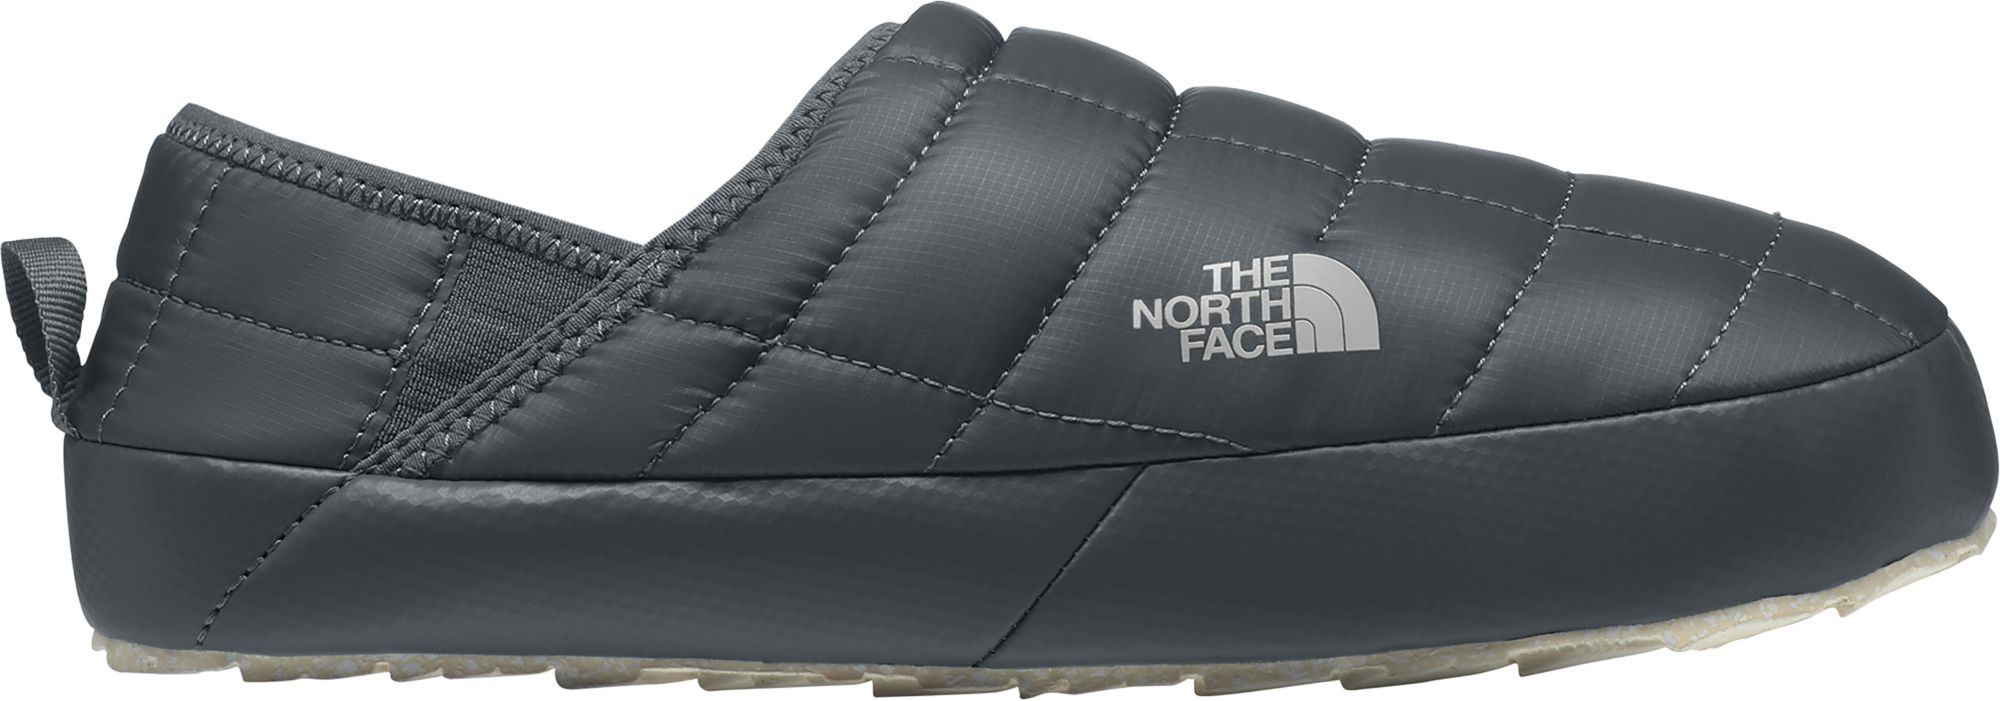 north face mules